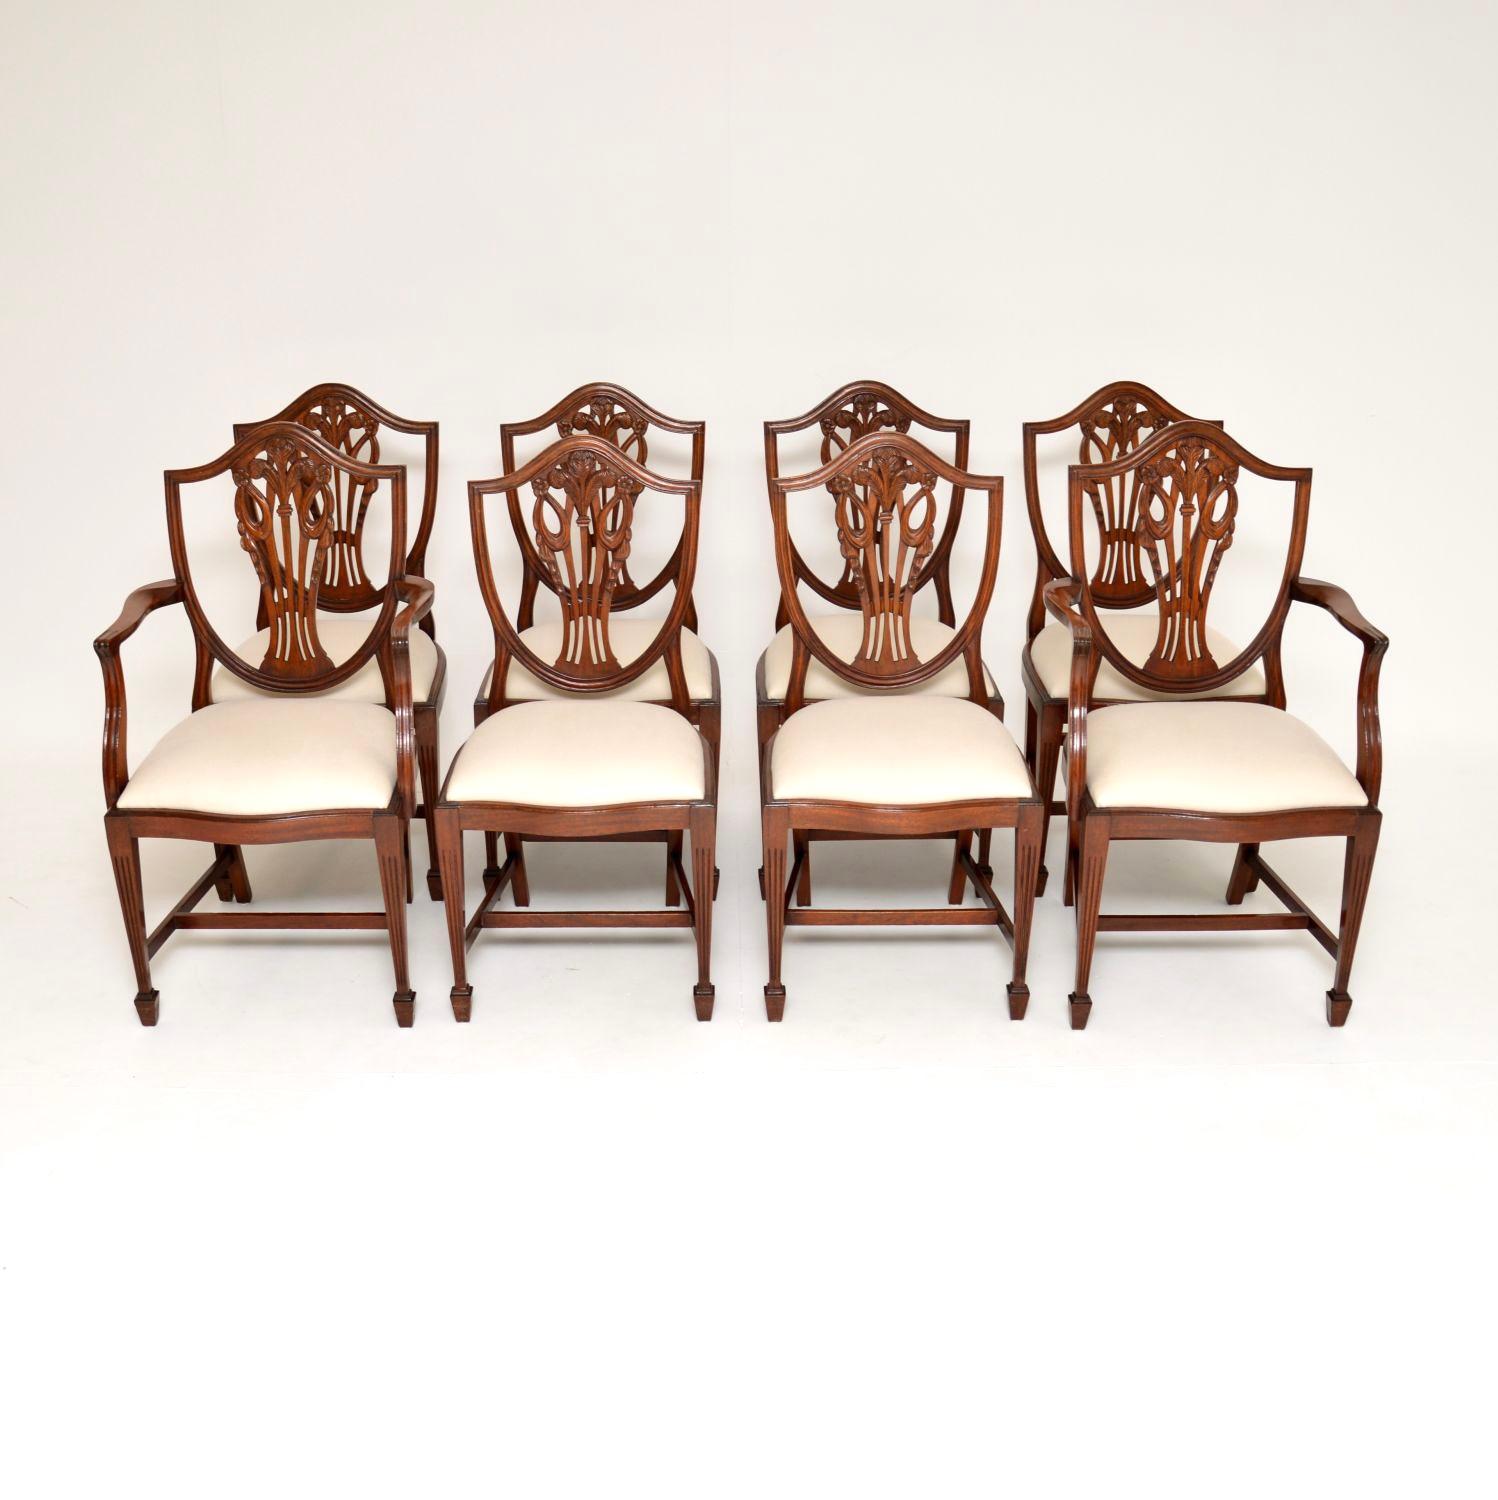 A fantastic set of eight solid wood dining chairs in the antique Sheraton style. These were made in England, they date from around the 1930-50’s period.

They are of lovely quality, they are sturdy and well built with a beautiful design. The